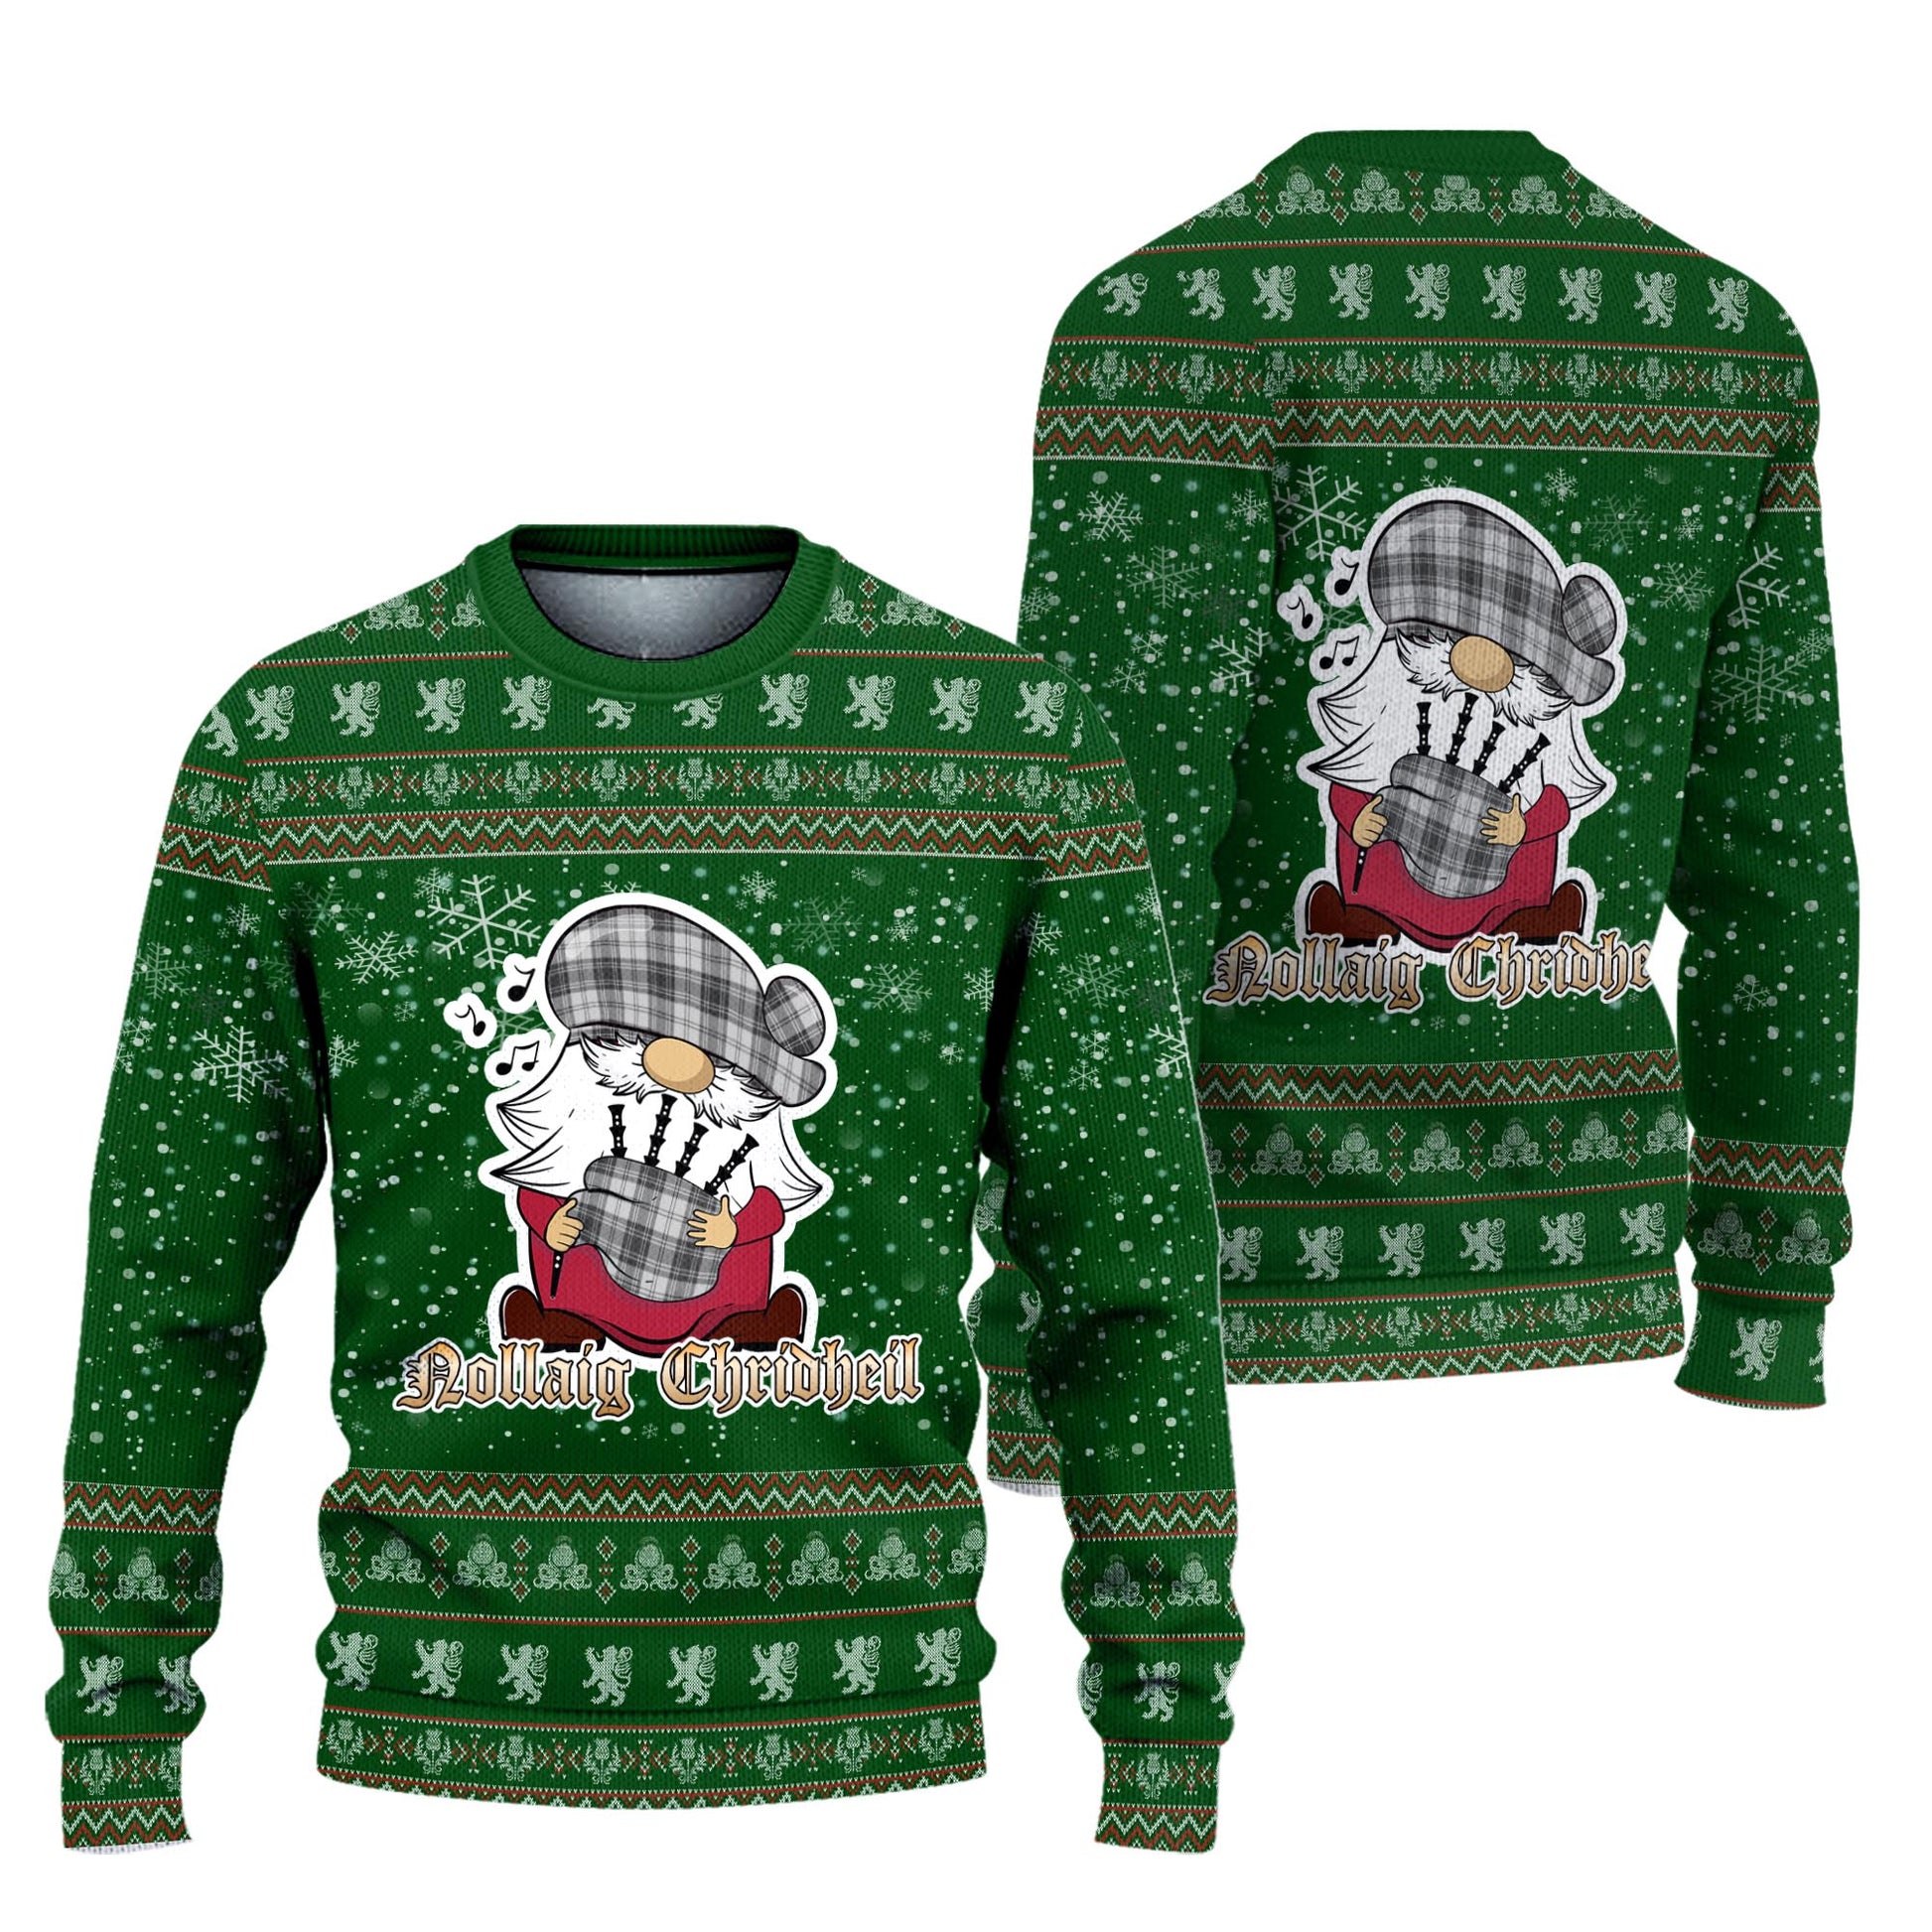 Glen Clan Christmas Family Knitted Sweater with Funny Gnome Playing Bagpipes Unisex Green - Tartanvibesclothing